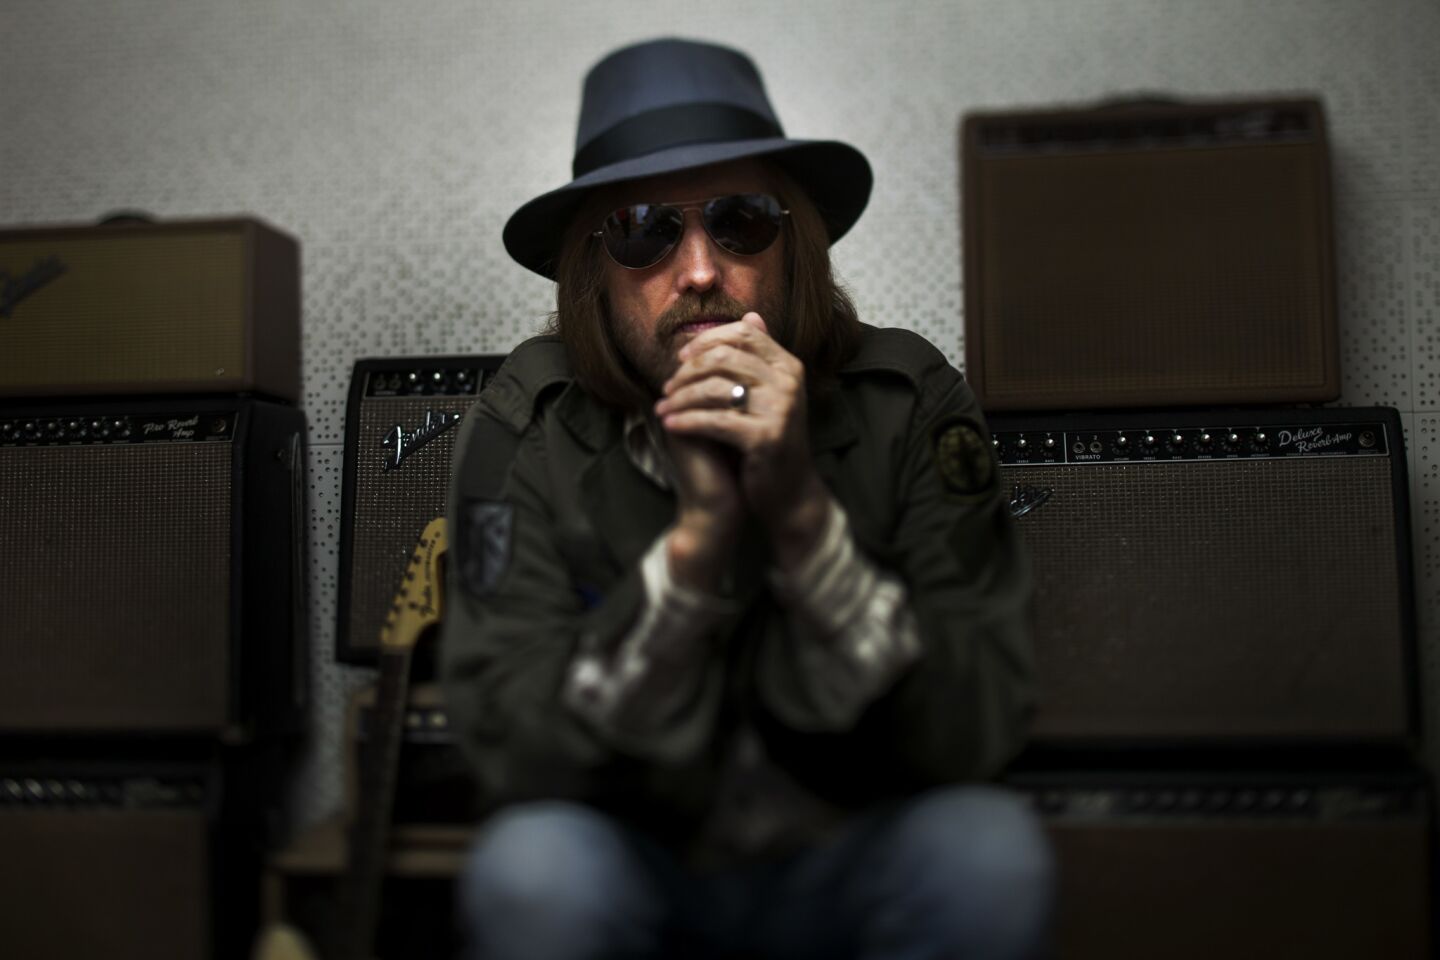 Rock and roll legend Tom Petty is photographed in the studio of his L.A. area home.